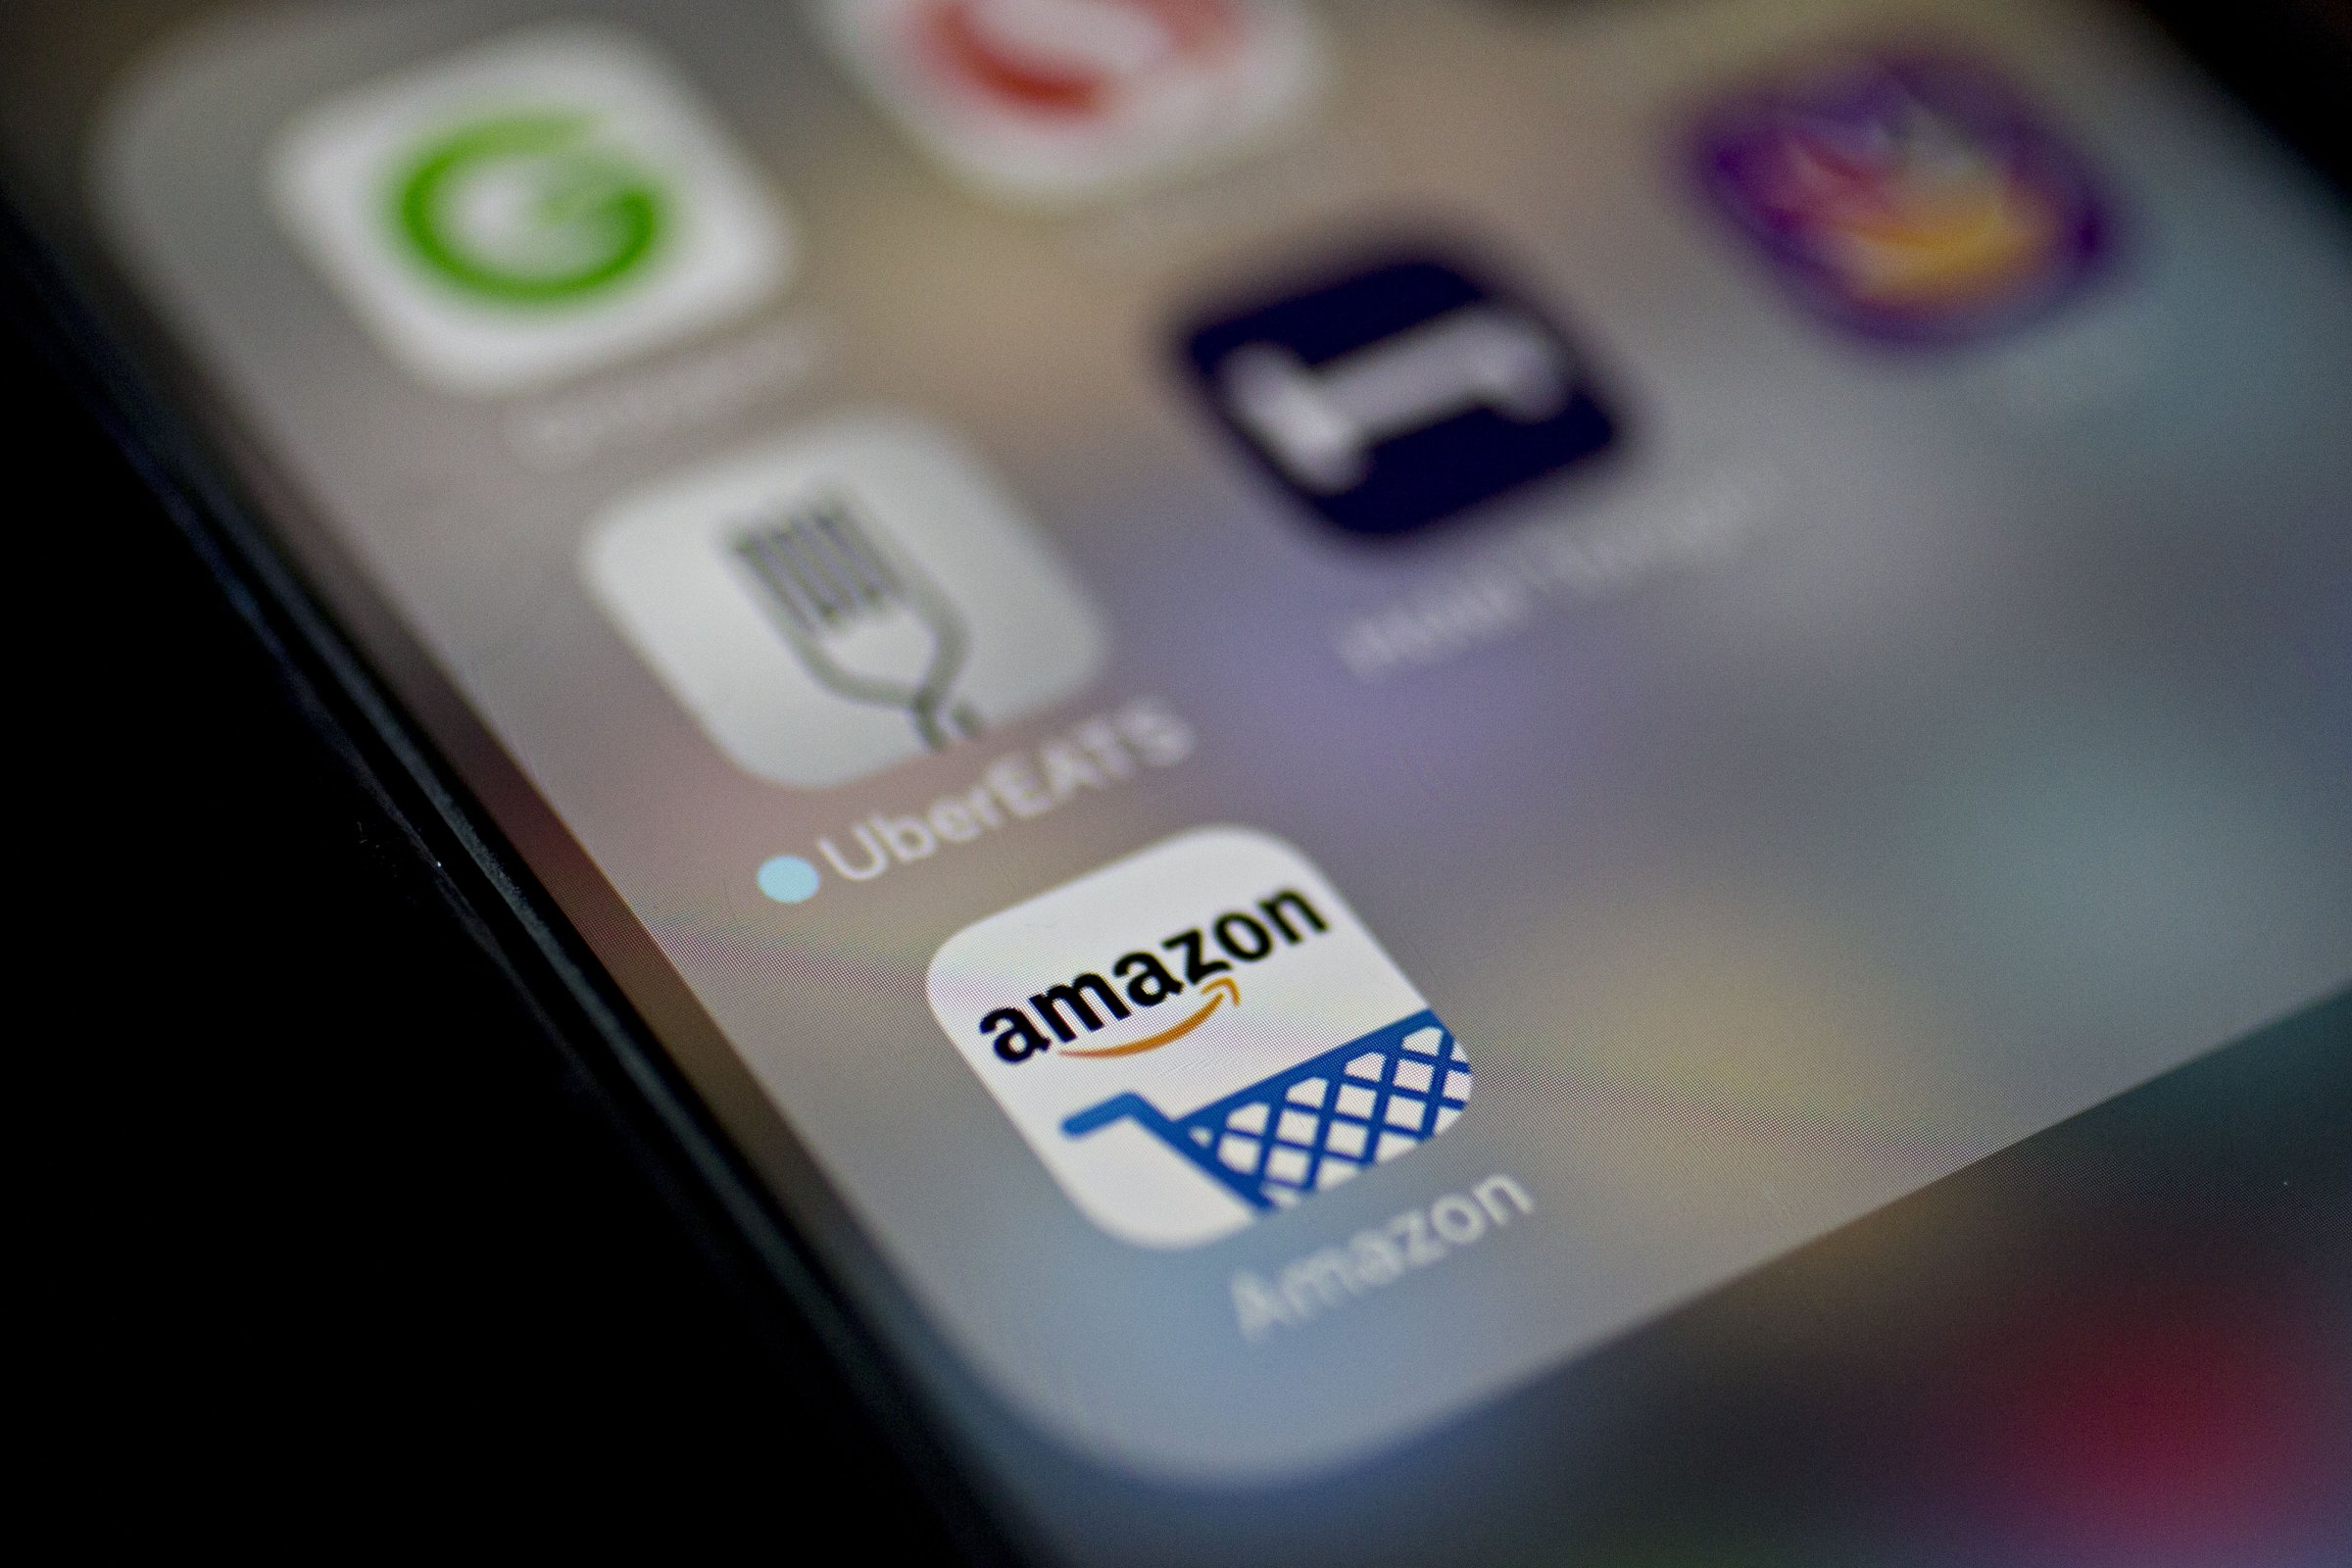 Amazon.com Inc. App As Company Promotes New Tool To Protect Cloud Customers